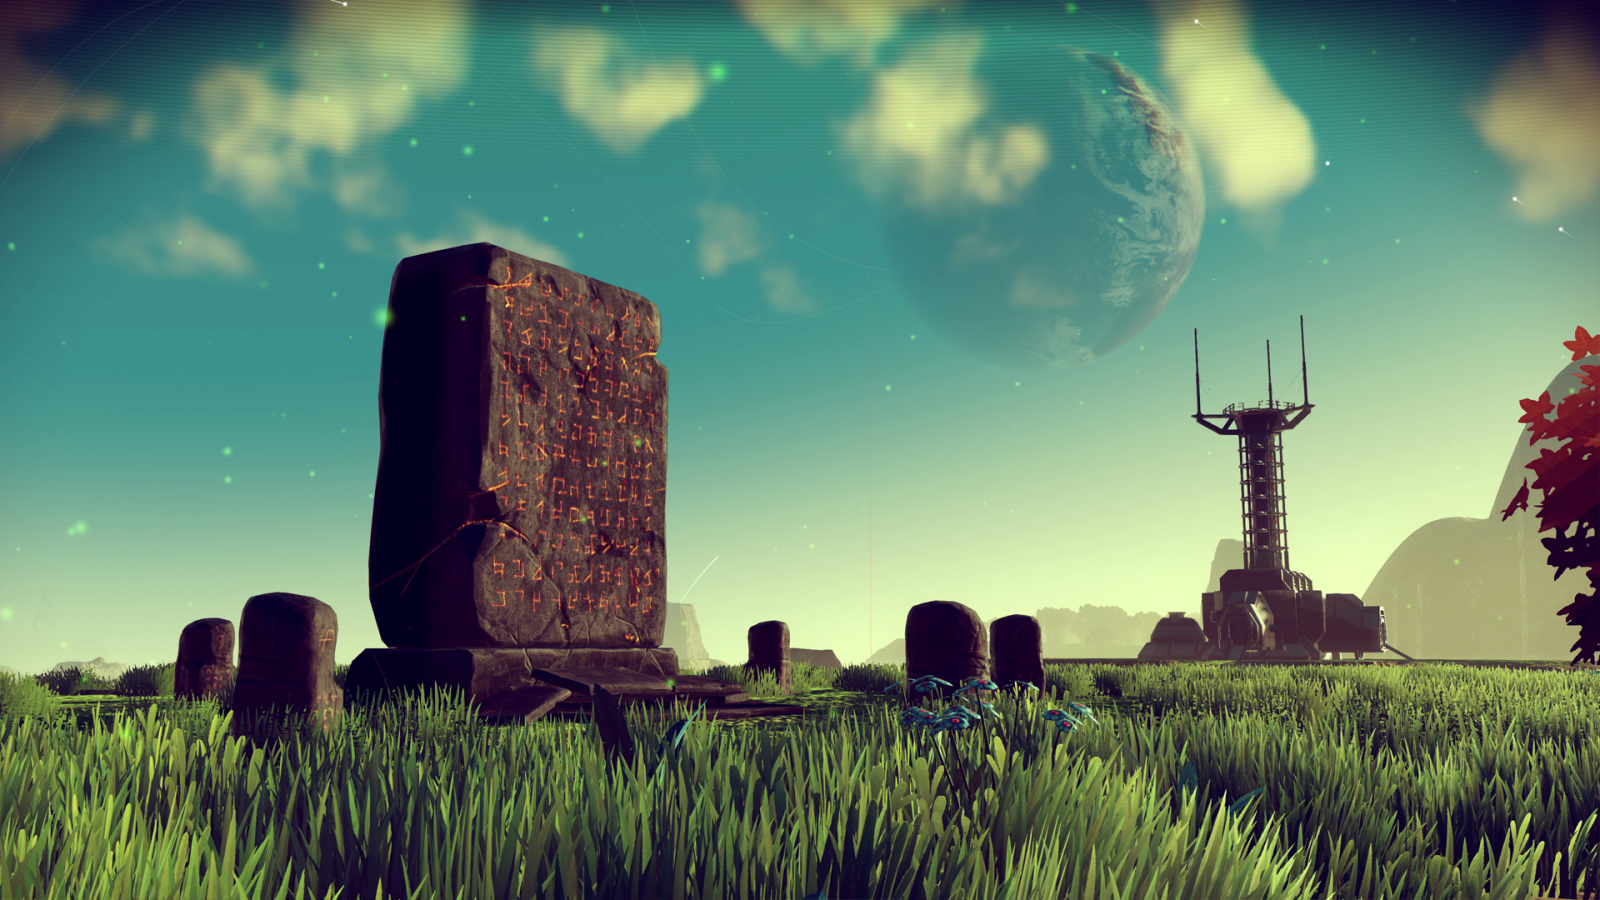 No Man's Sky server reset ahead of launch will wipe all discoveries gamers have made